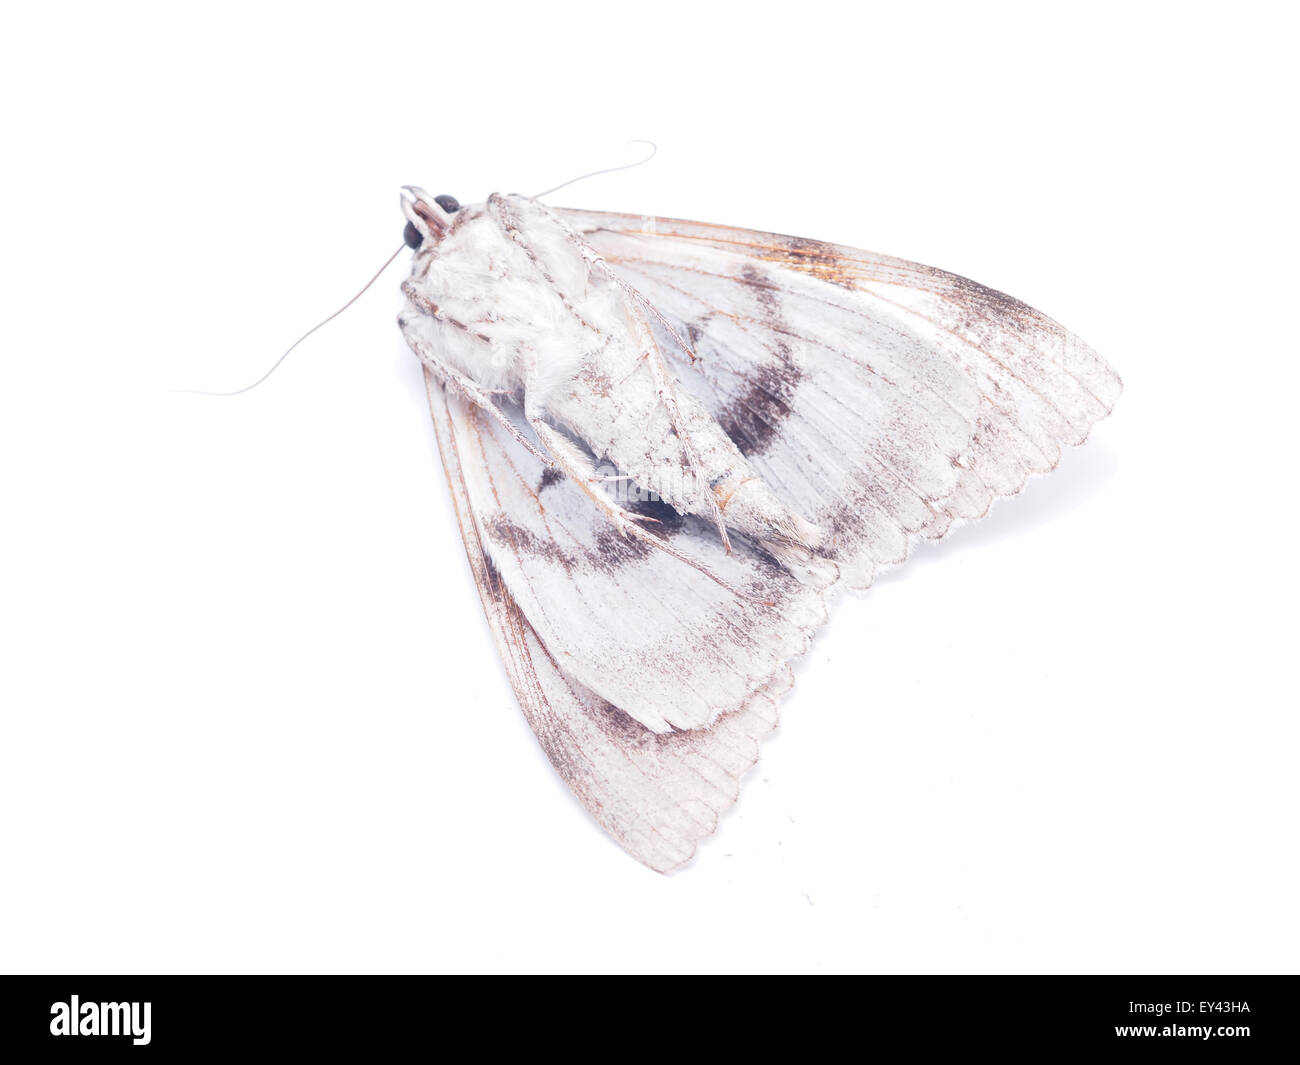 hawk moth on a white background Stock Photo